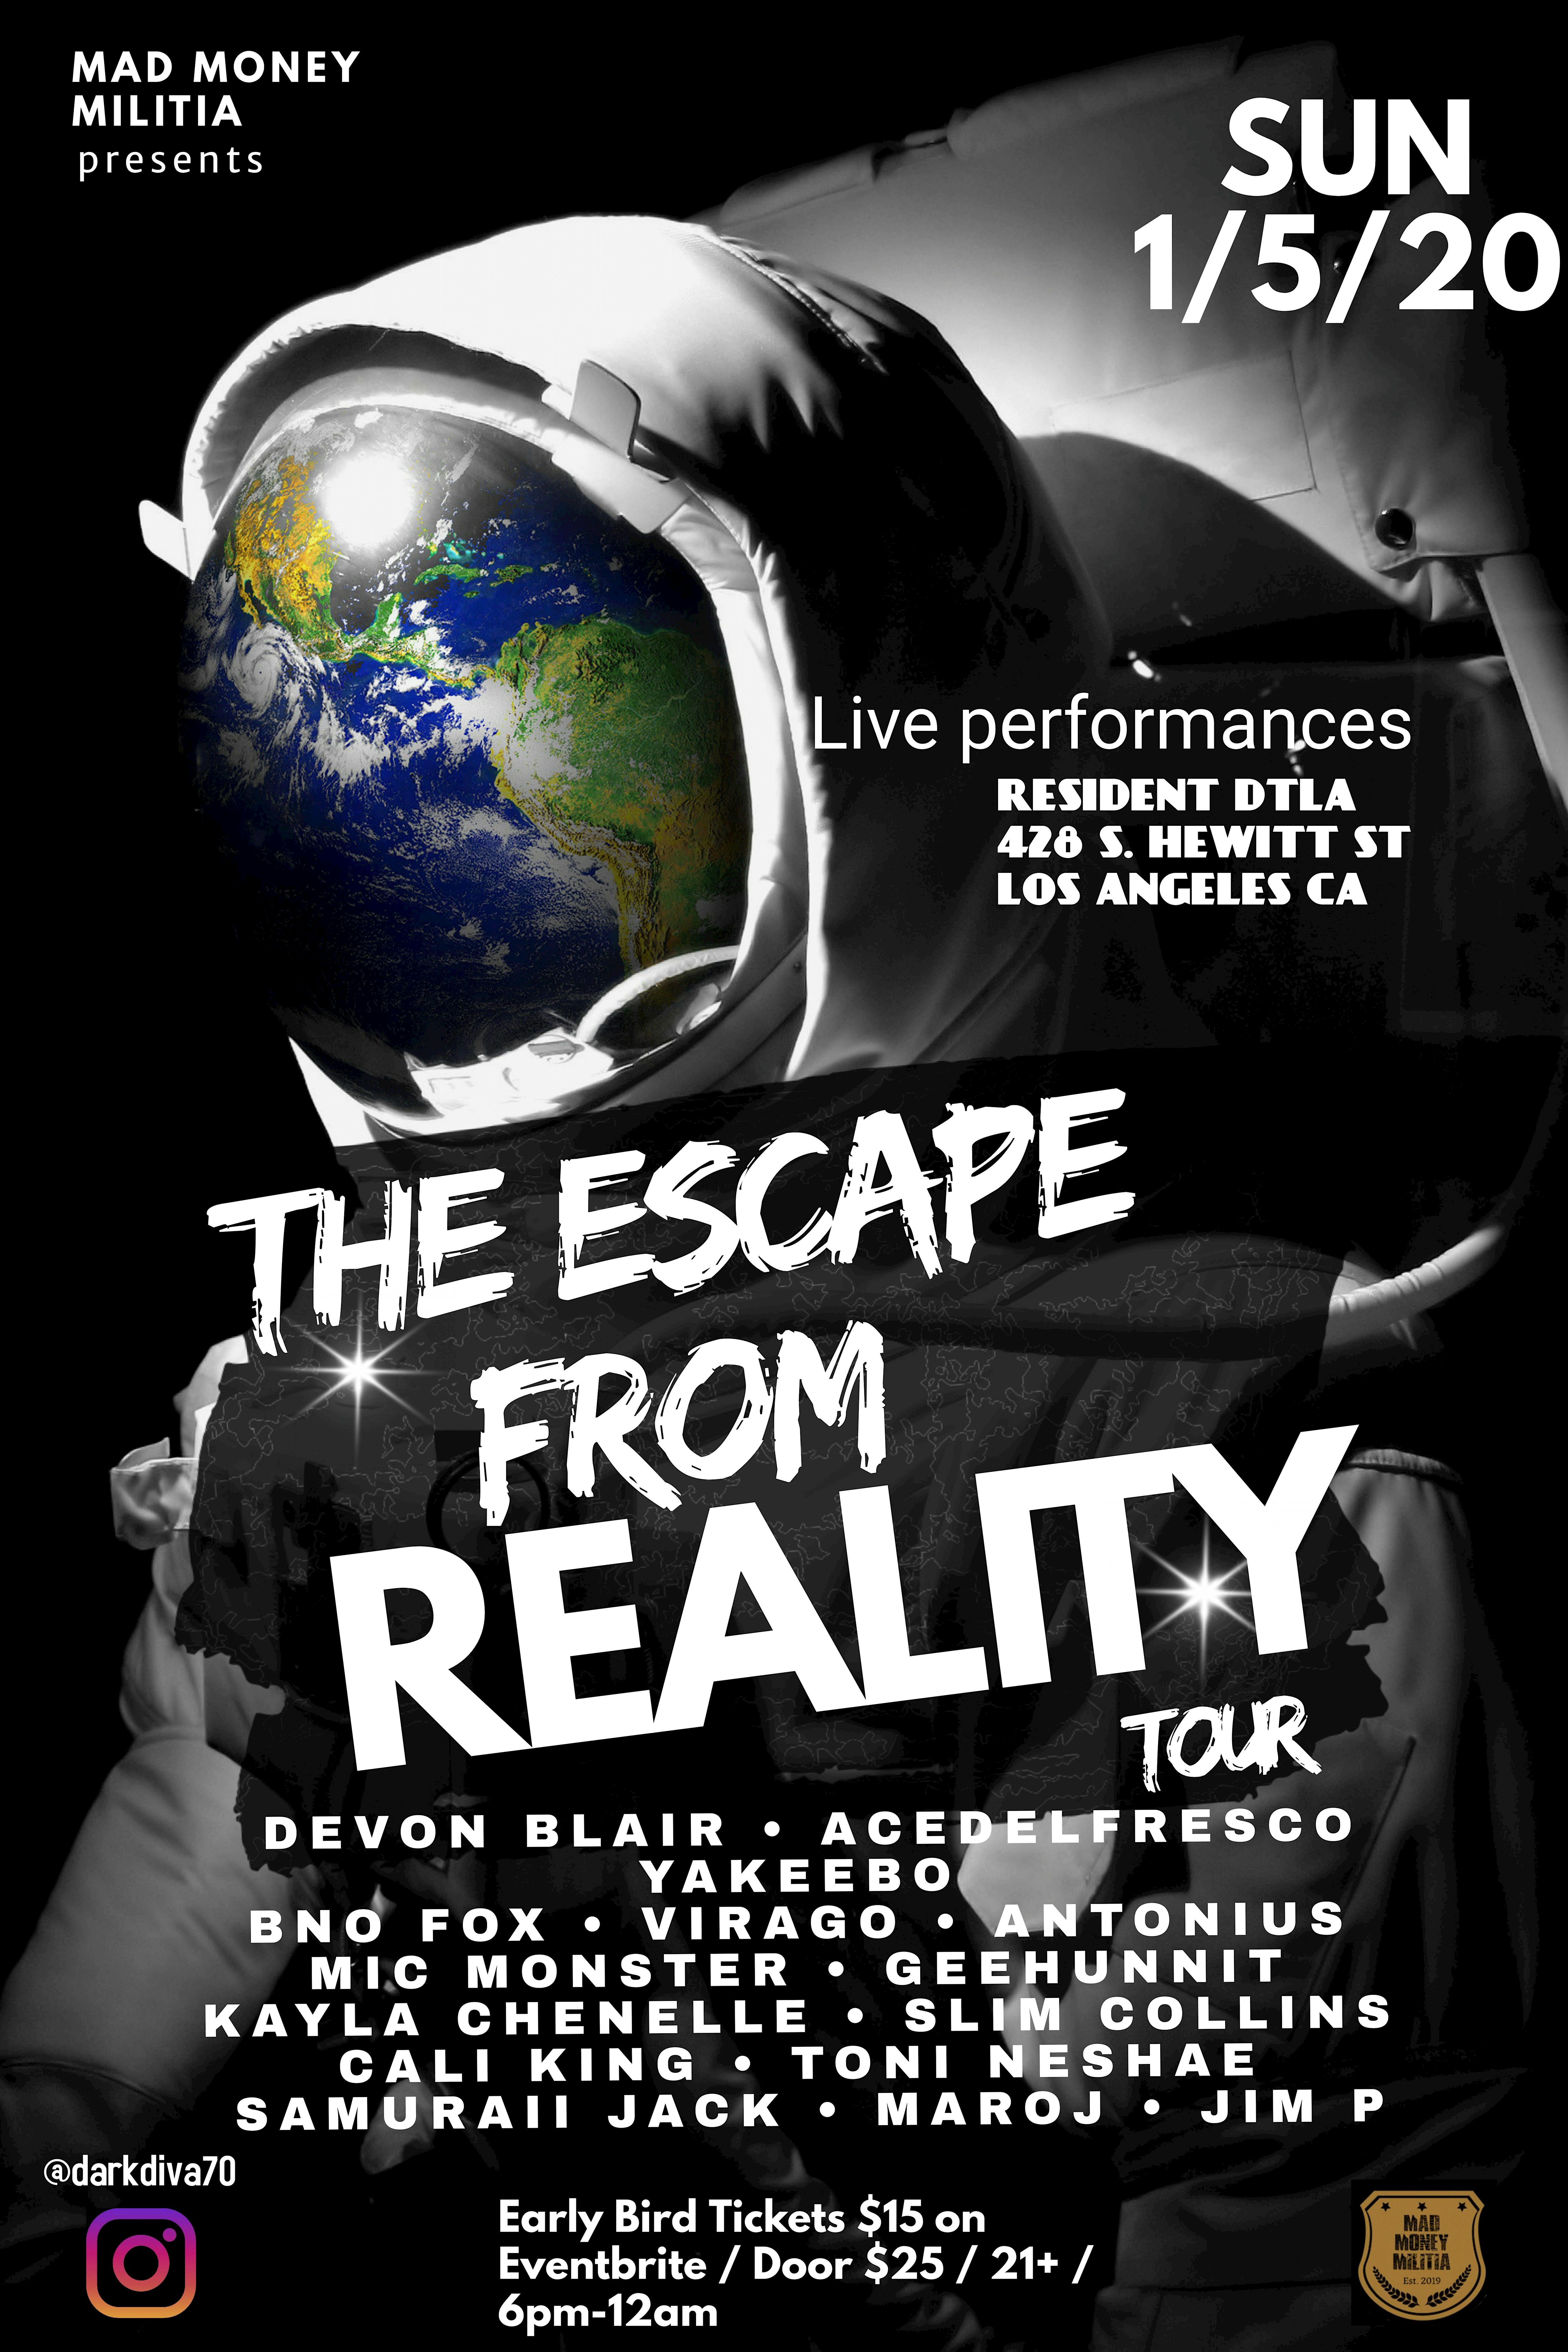 The Escape From Reality Tour Powered by Mad Money Militia